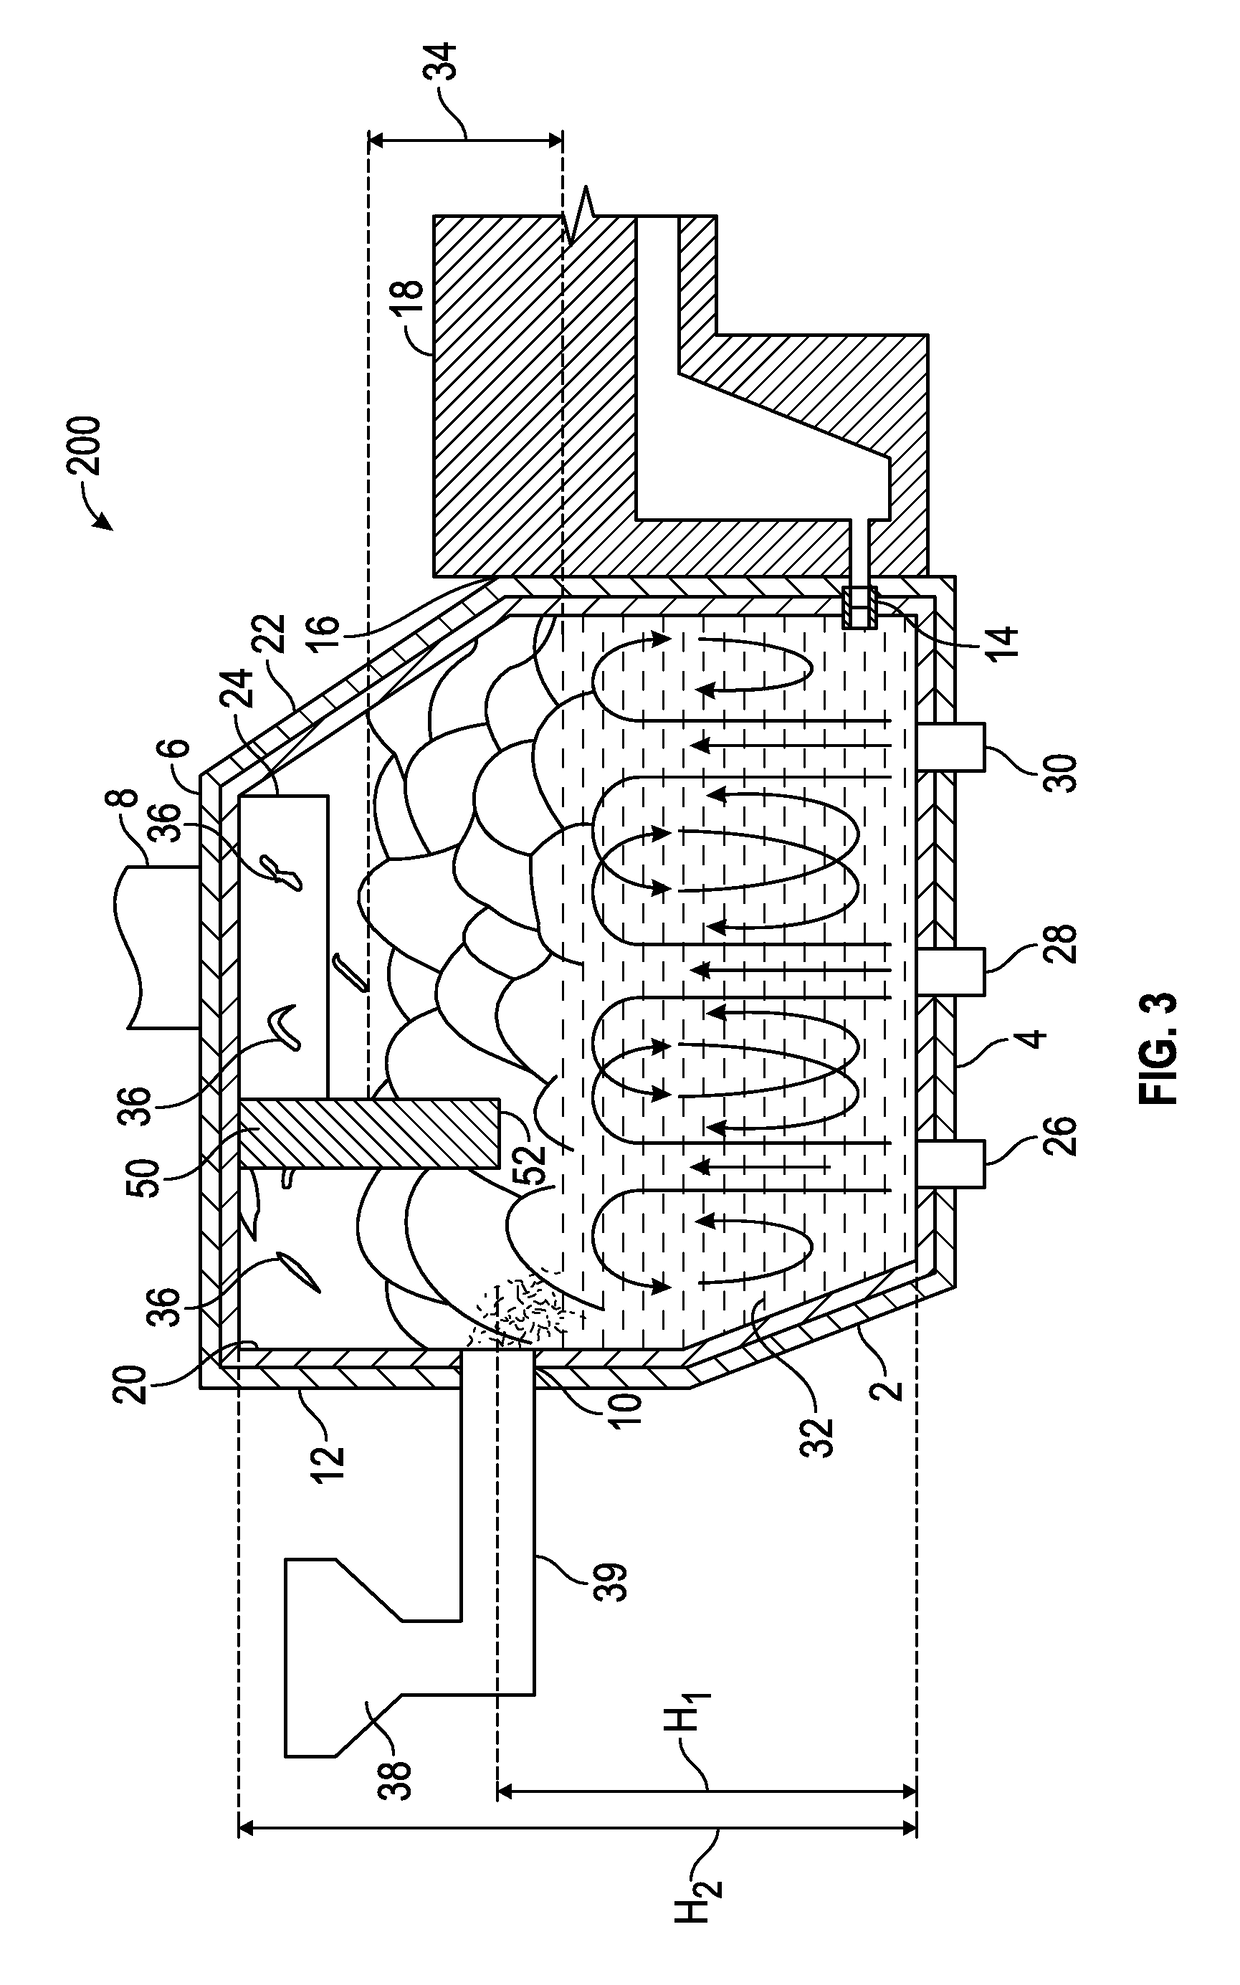 Submerged combustion melters and methods of feeding particulate material into such melters